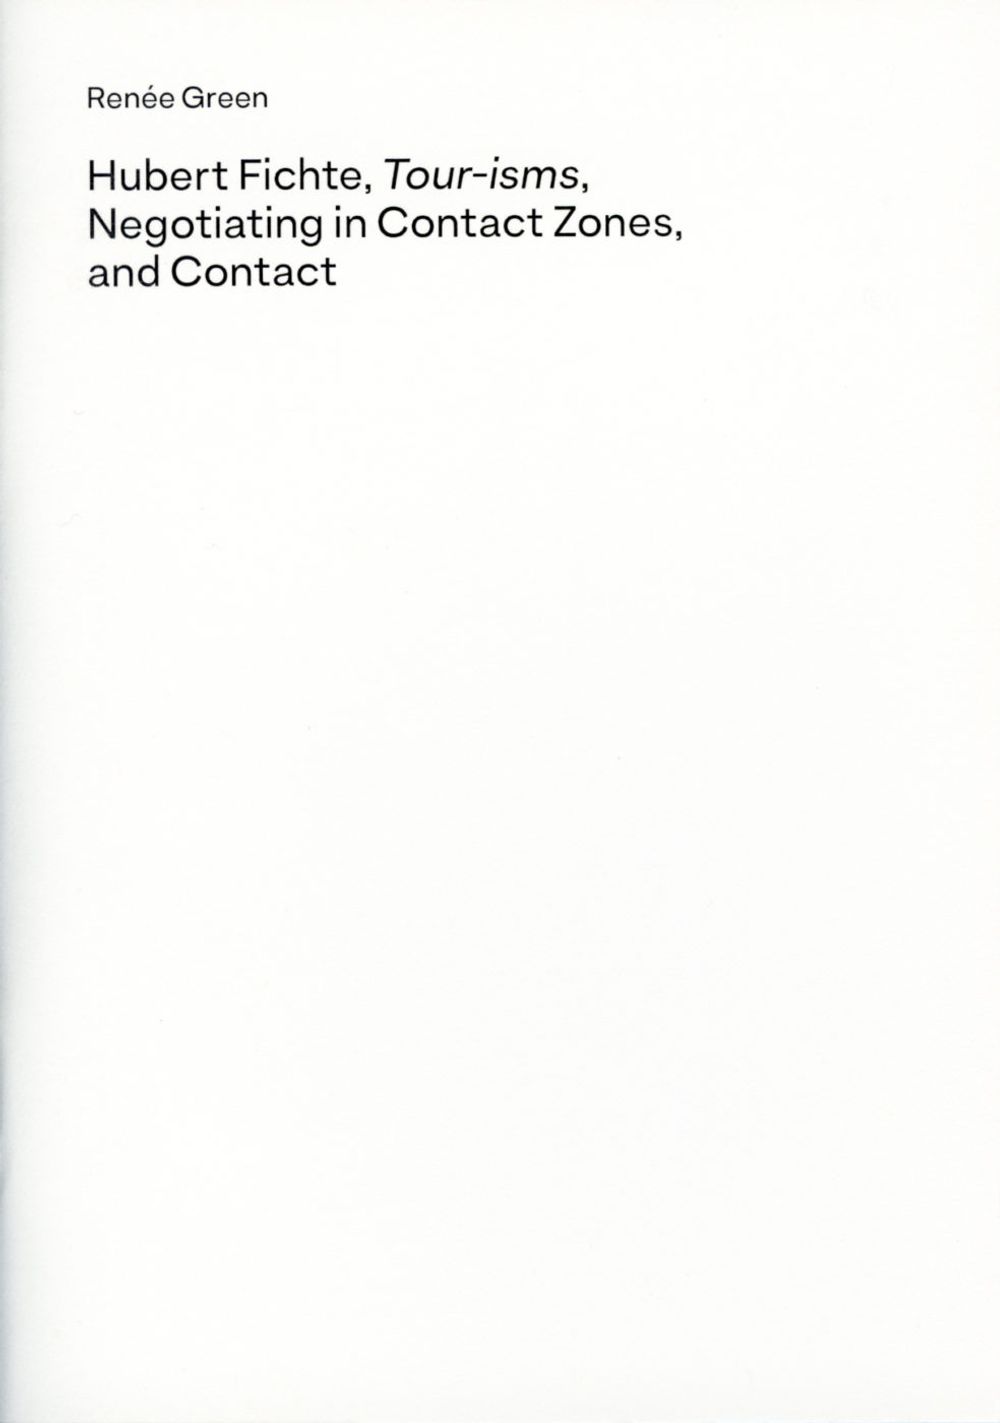 Book cover on plain gray background with title of Hubert Fichte, Tour-isms, Negotiating in Contact Zones, and Contact